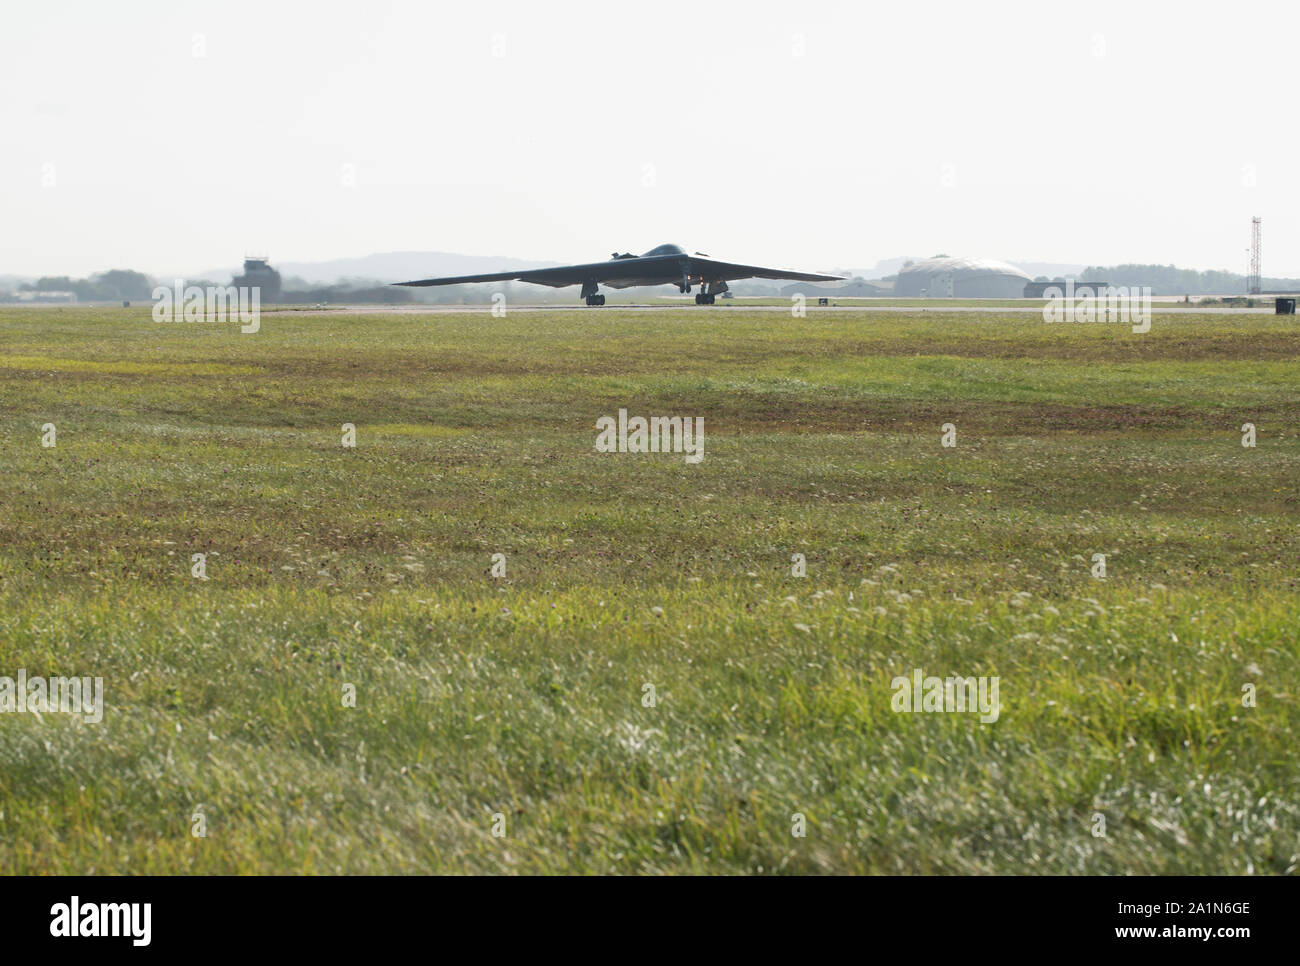 A B-2 Spirit lifts off of a runway on Sept. 19, 2019, at Royal Air Force Fairford, England. Three B-2's deployed to RAF Fairford as part of Bomber Task Force Europe, which challenged the stealth aircraft, as well as Airmen and support equipment from Whiteman Air Force Base, Missouri, to confuct integration and flying operations at forward locations across Europe. (U.S. Air Force photo by Staff Sgt. Kayla White) Stock Photo